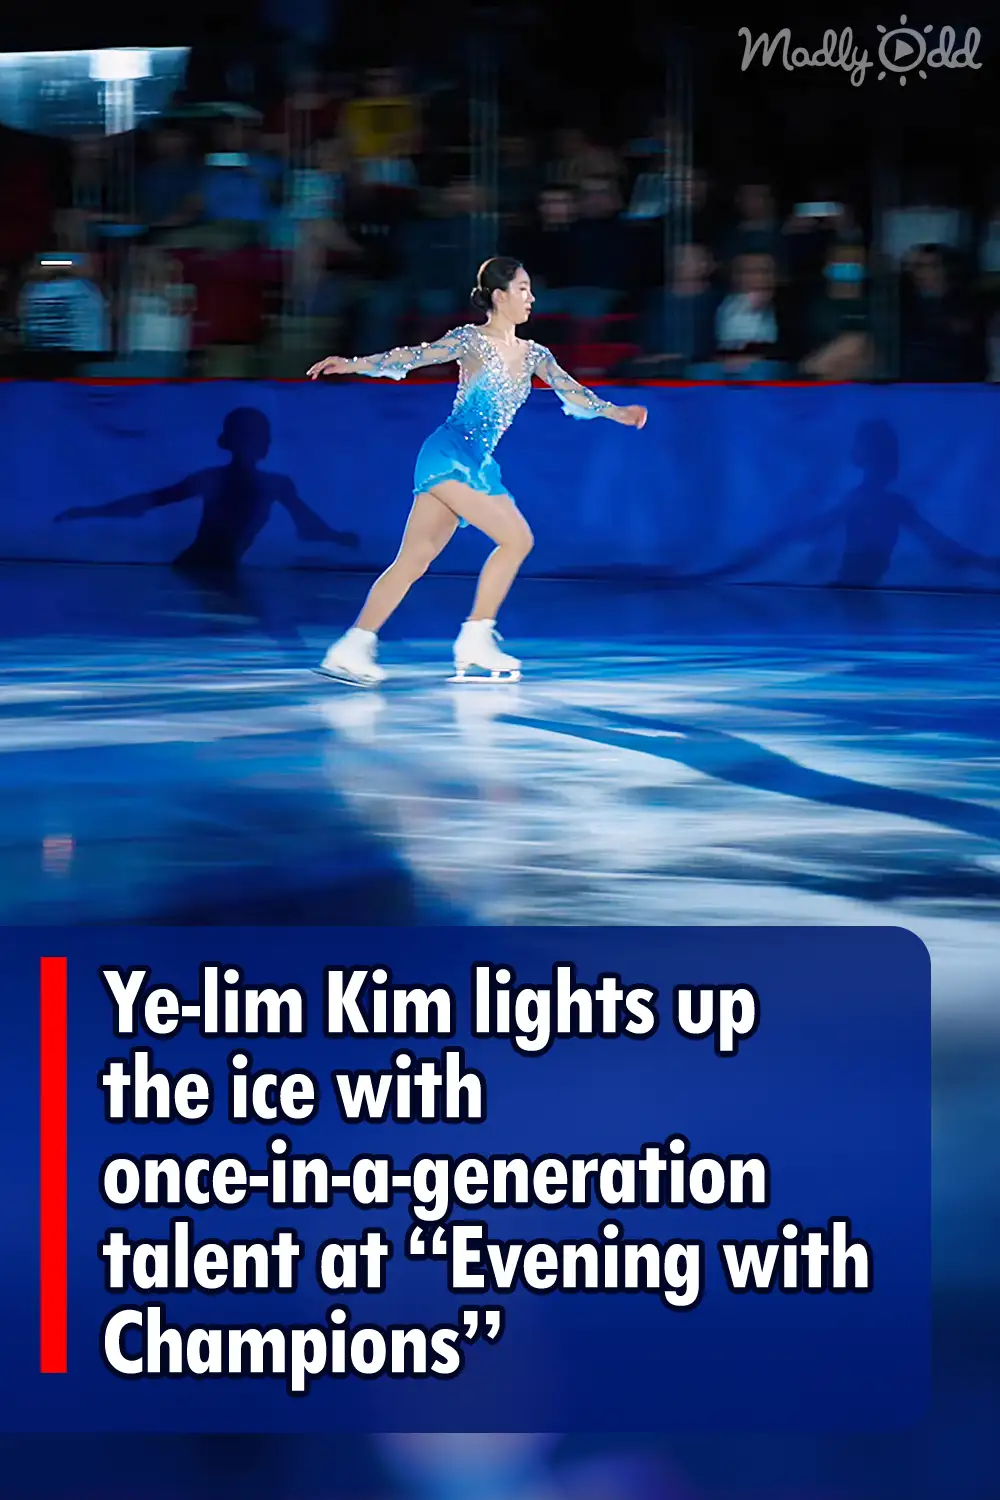 Ye-lim Kim lights up the ice with once-in-a-generation talent at Evening with Champions